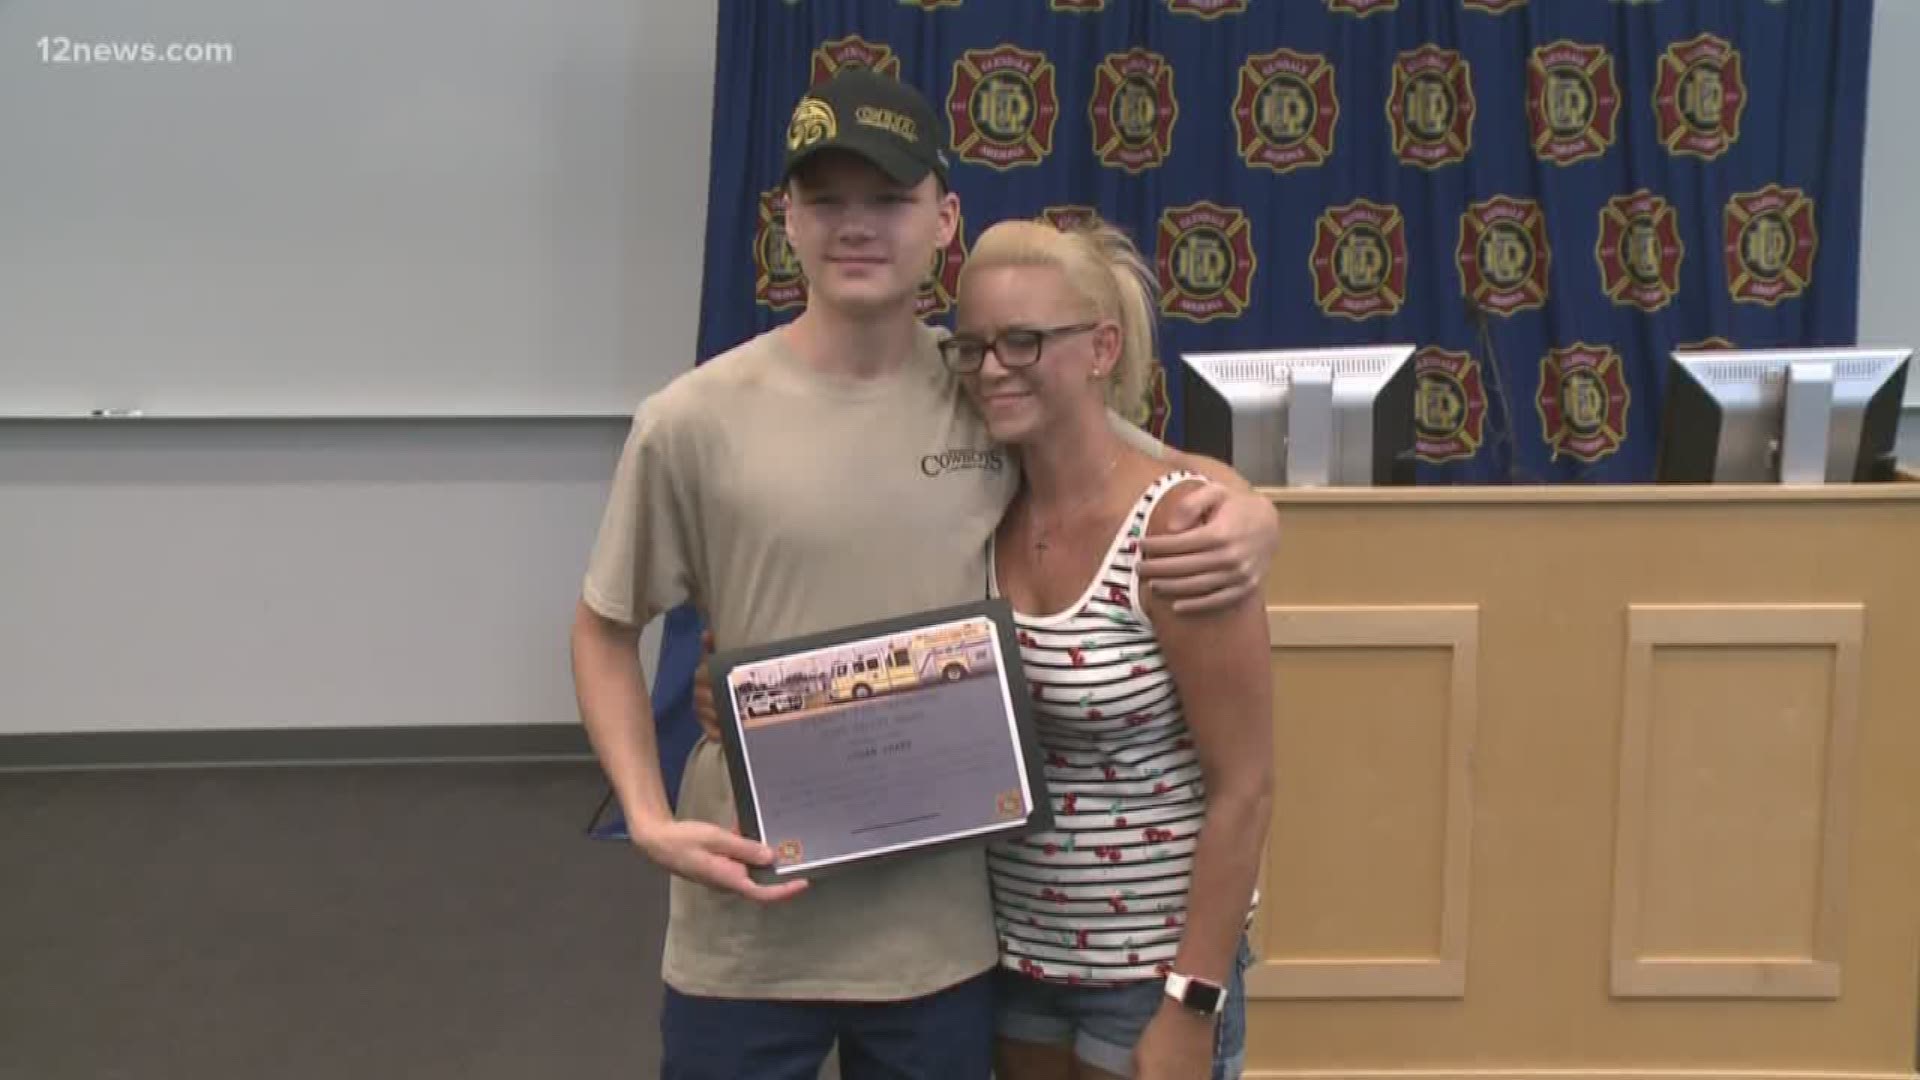 The Glendale Fire Department honored 17-year-old Logan Hart with an award and called him a hero.